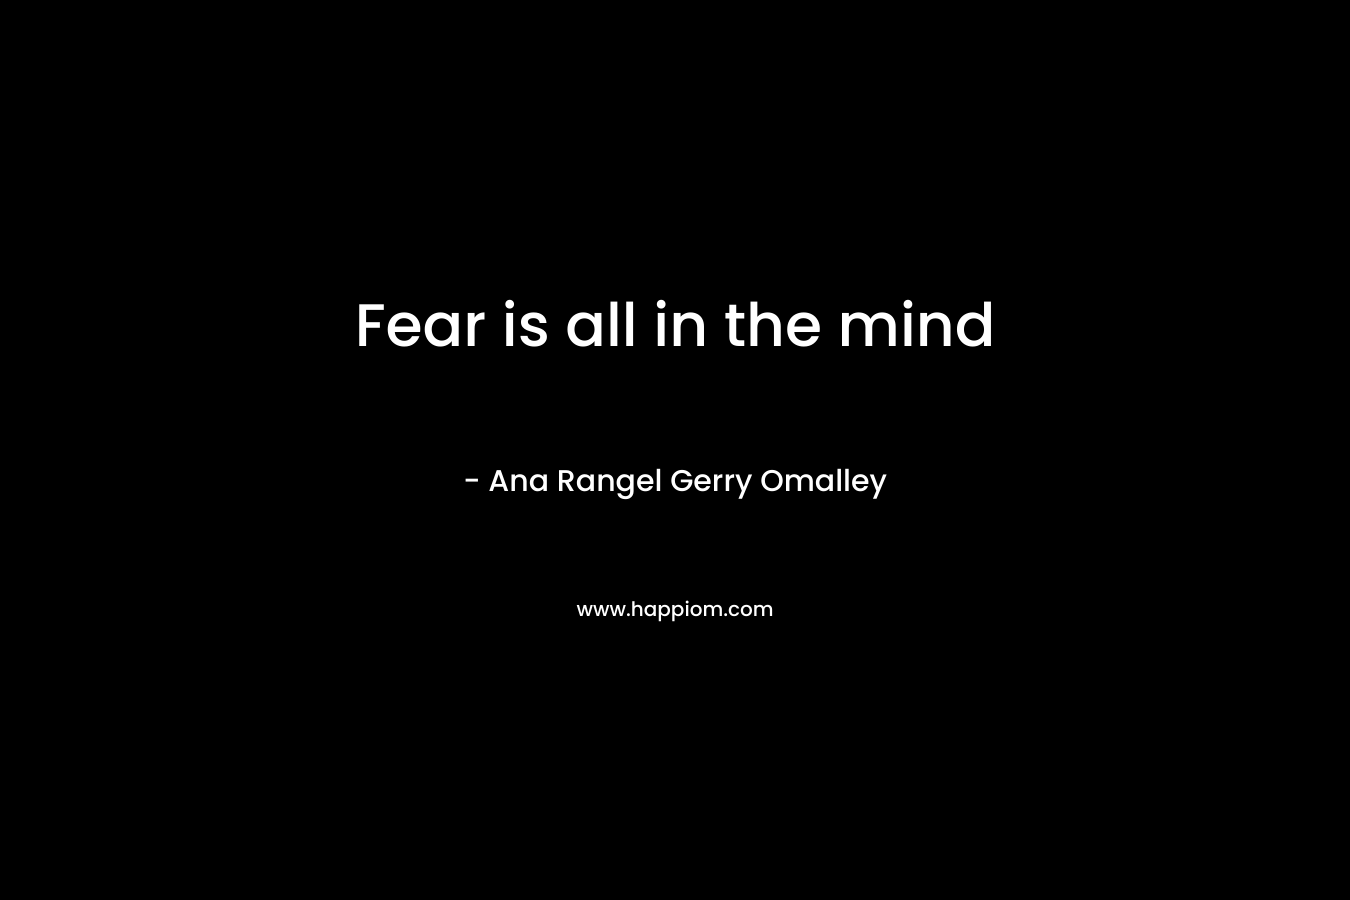 Fear is all in the mind